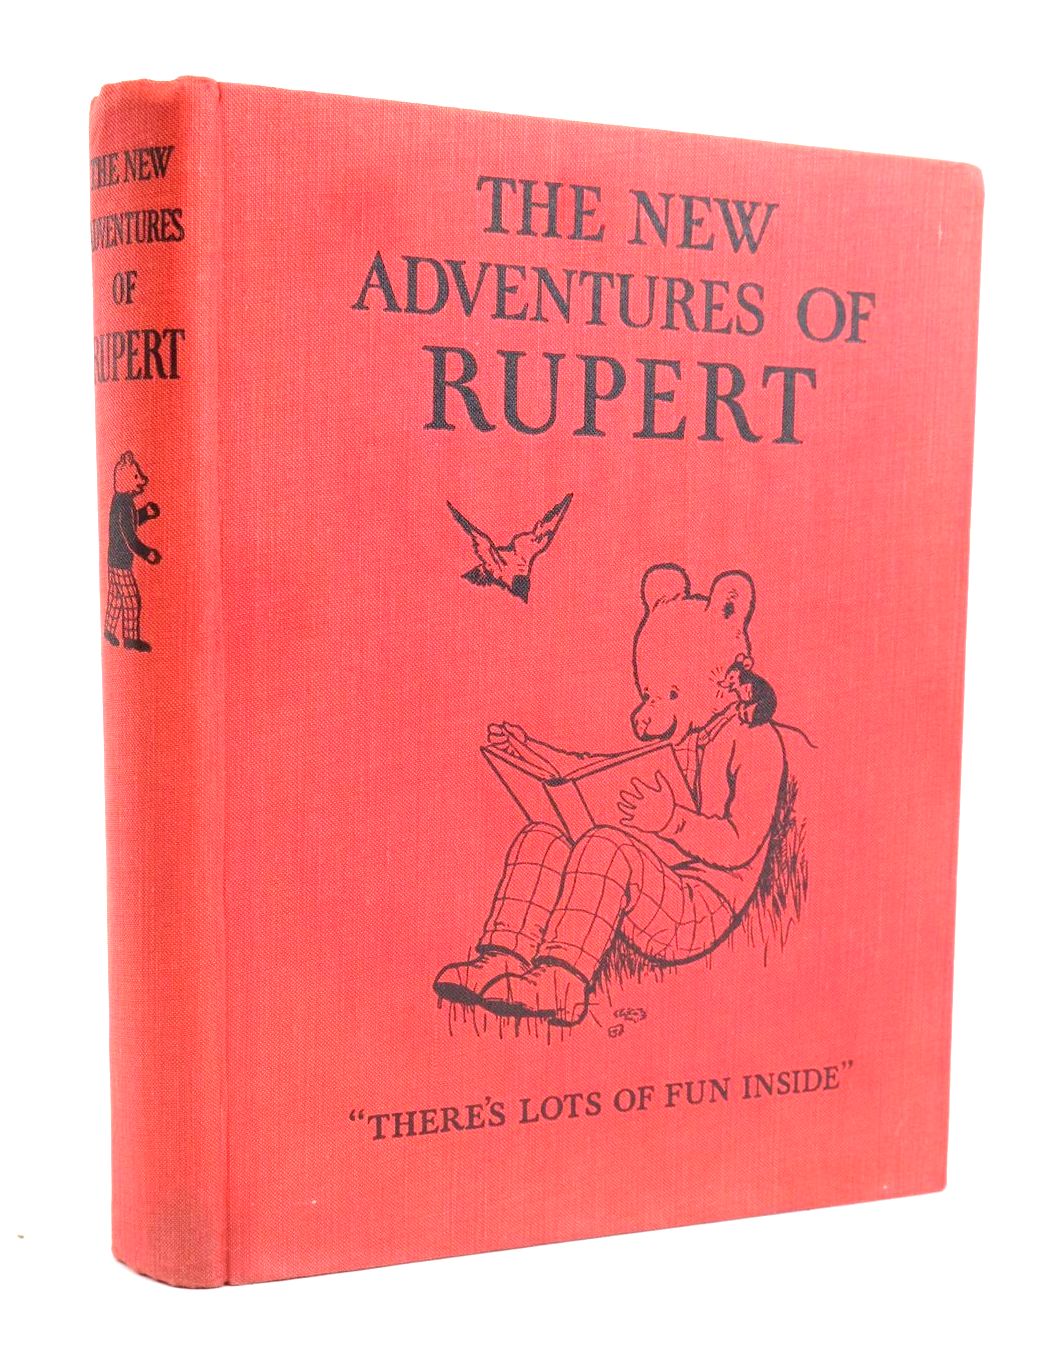 Photo of RUPERT ANNUAL 1936 - THE NEW ADVENTURES OF RUPERT written by Bestall, Alfred illustrated by Bestall, Alfred published by Daily Express (STOCK CODE: 1319929)  for sale by Stella & Rose's Books